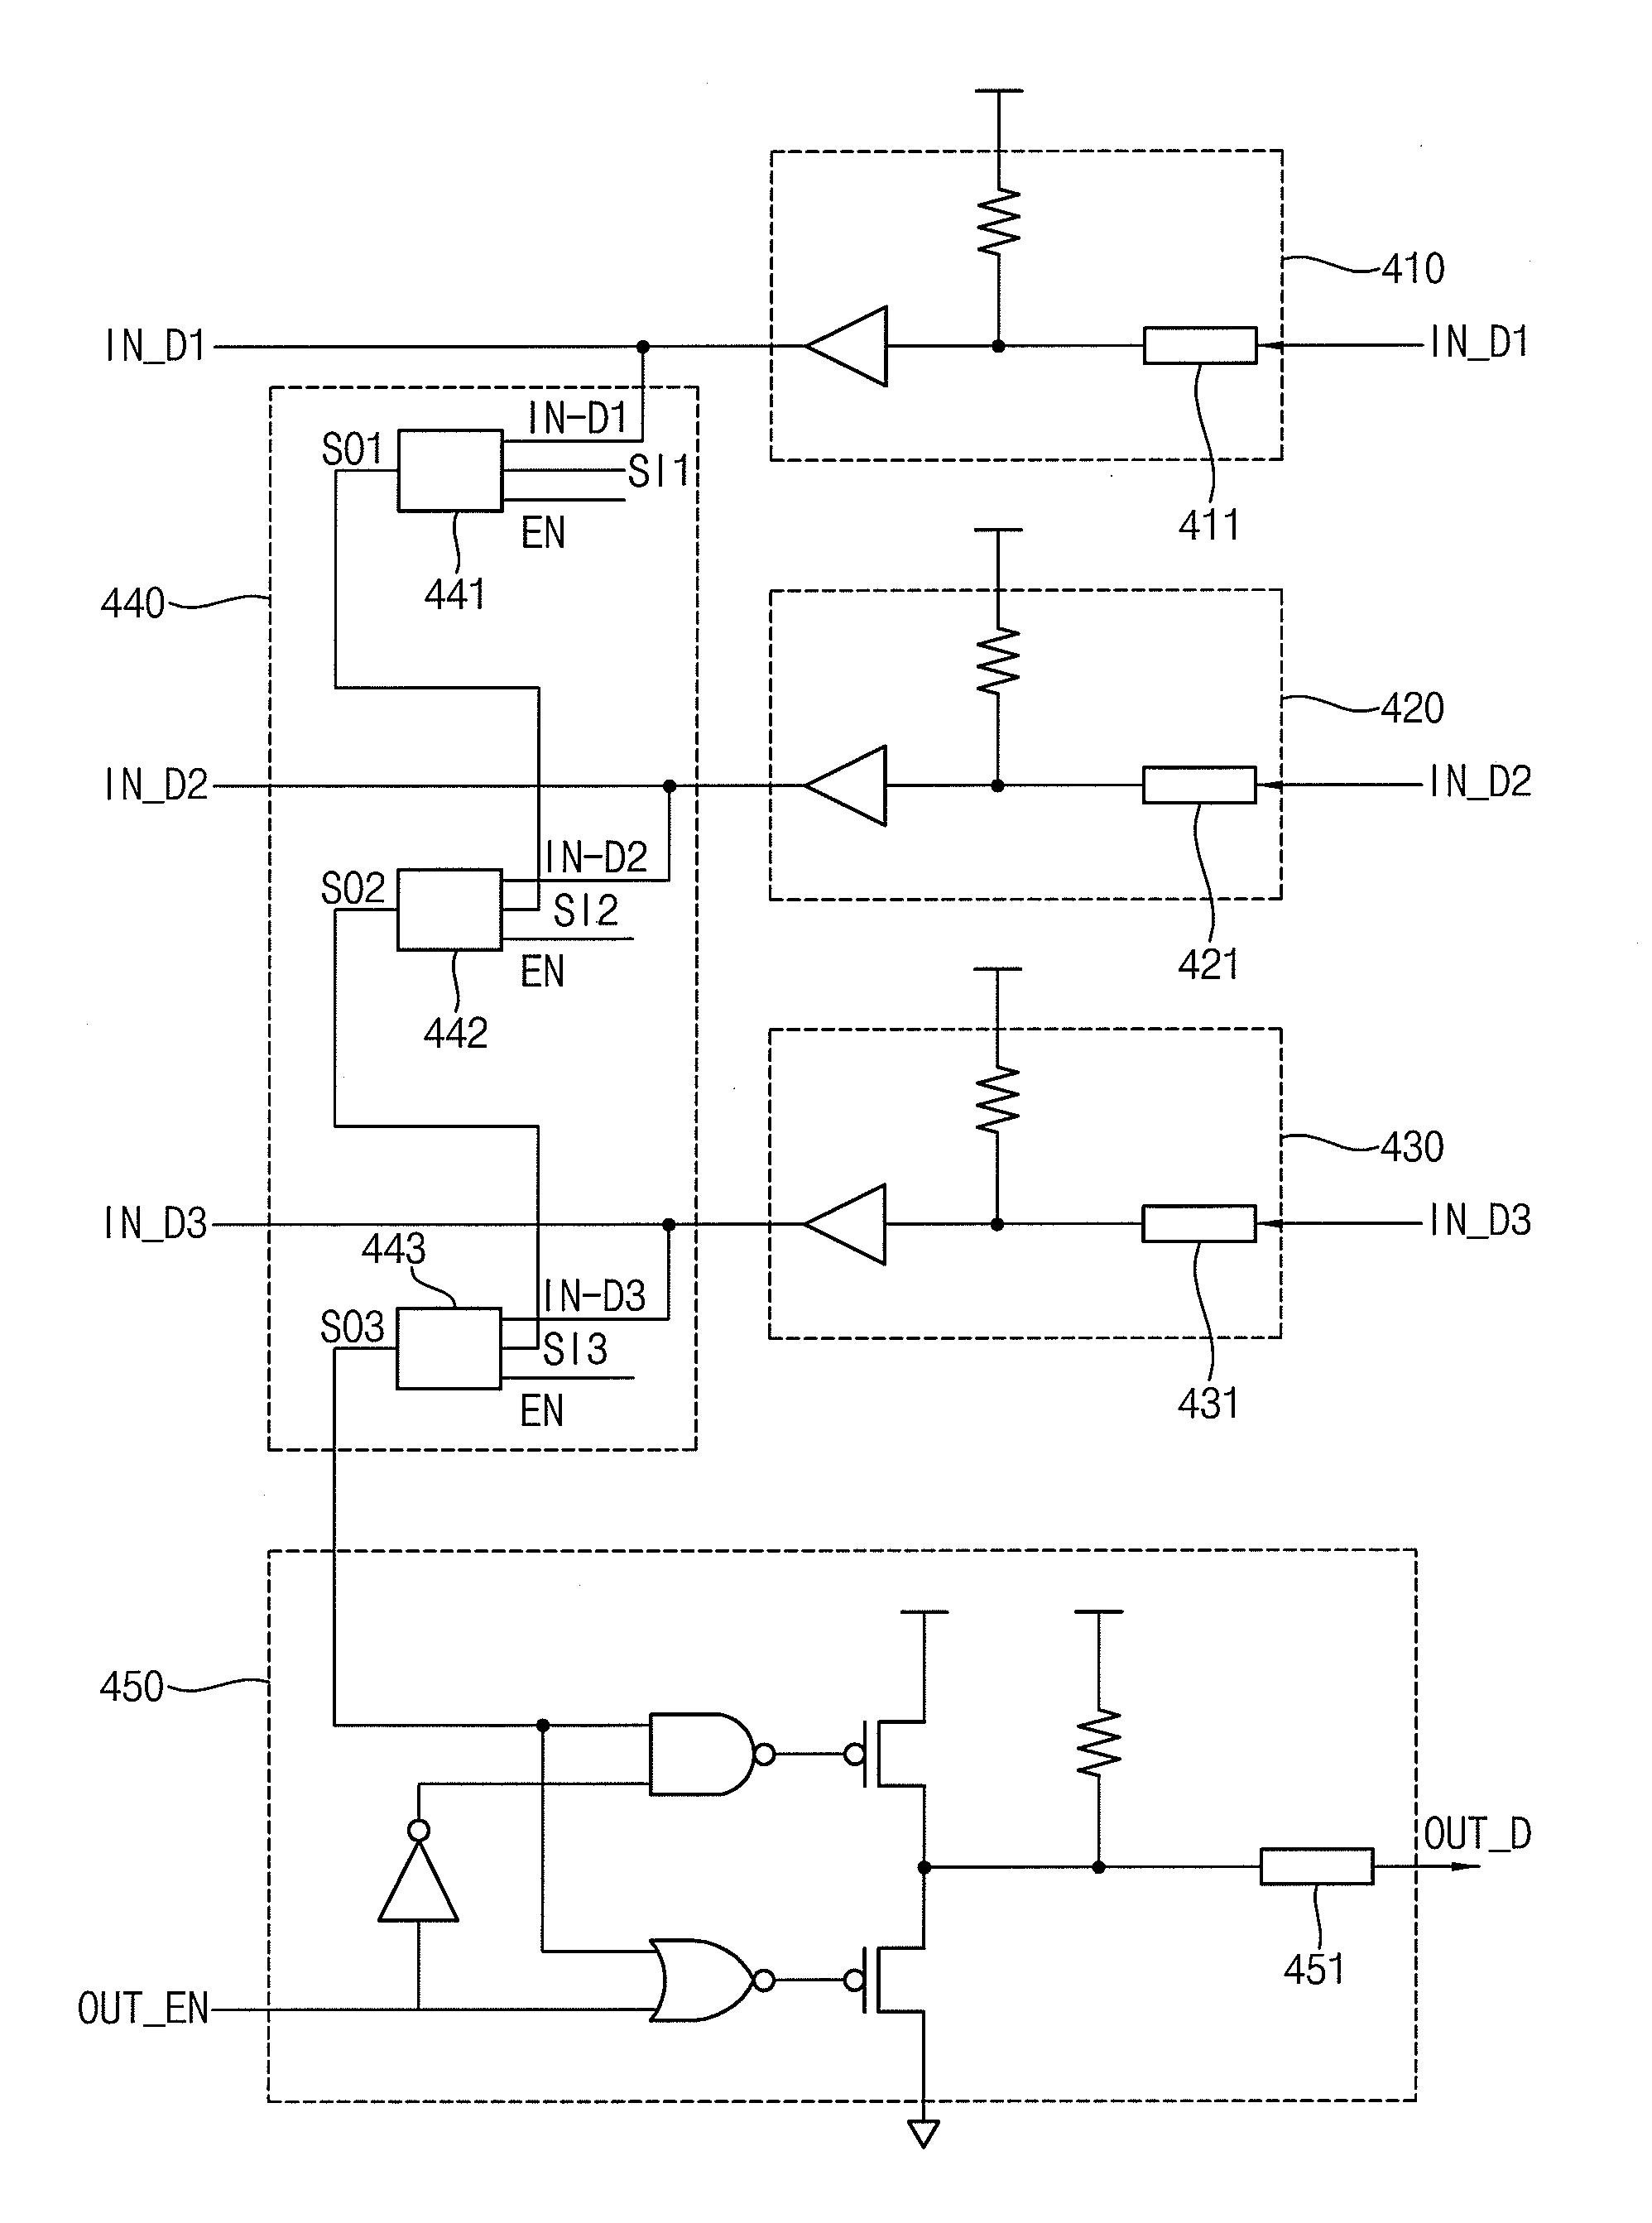 Pad unit having a test logic circuit and method of driving a system including the same